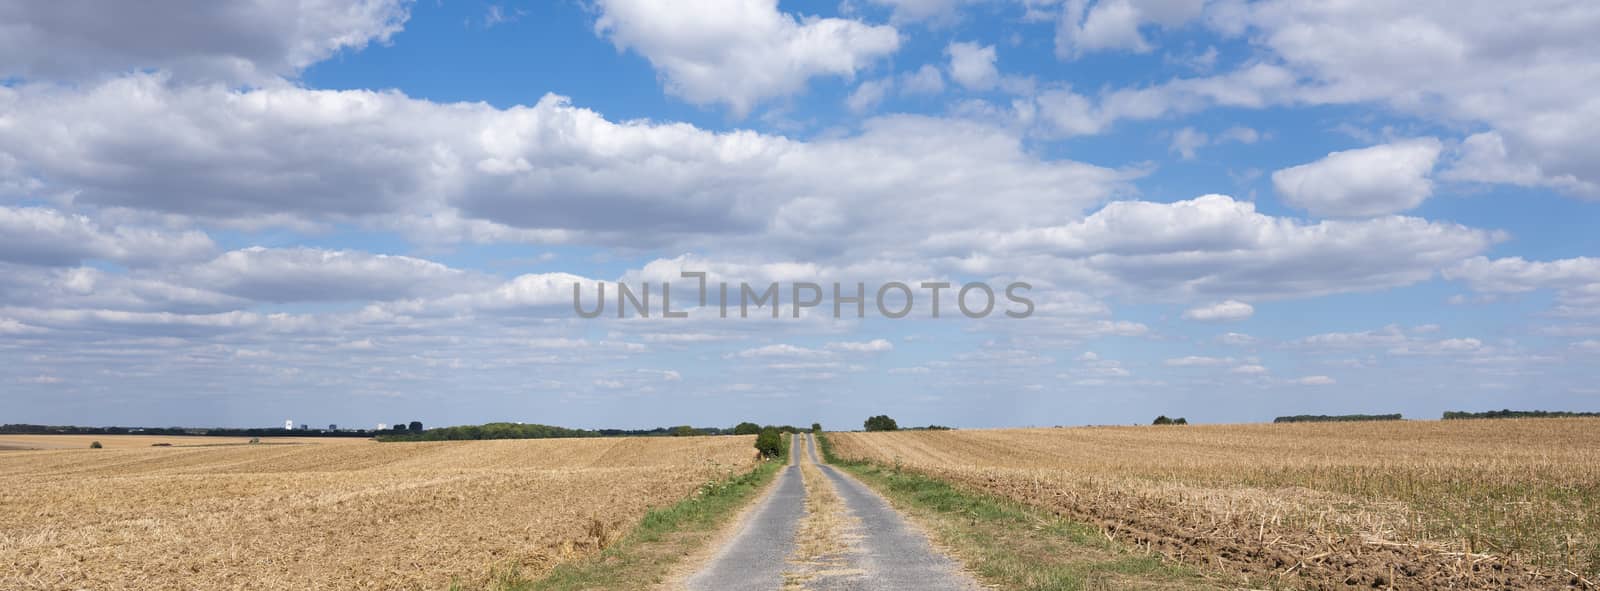 corn fields and country road in the north of france near Amiens